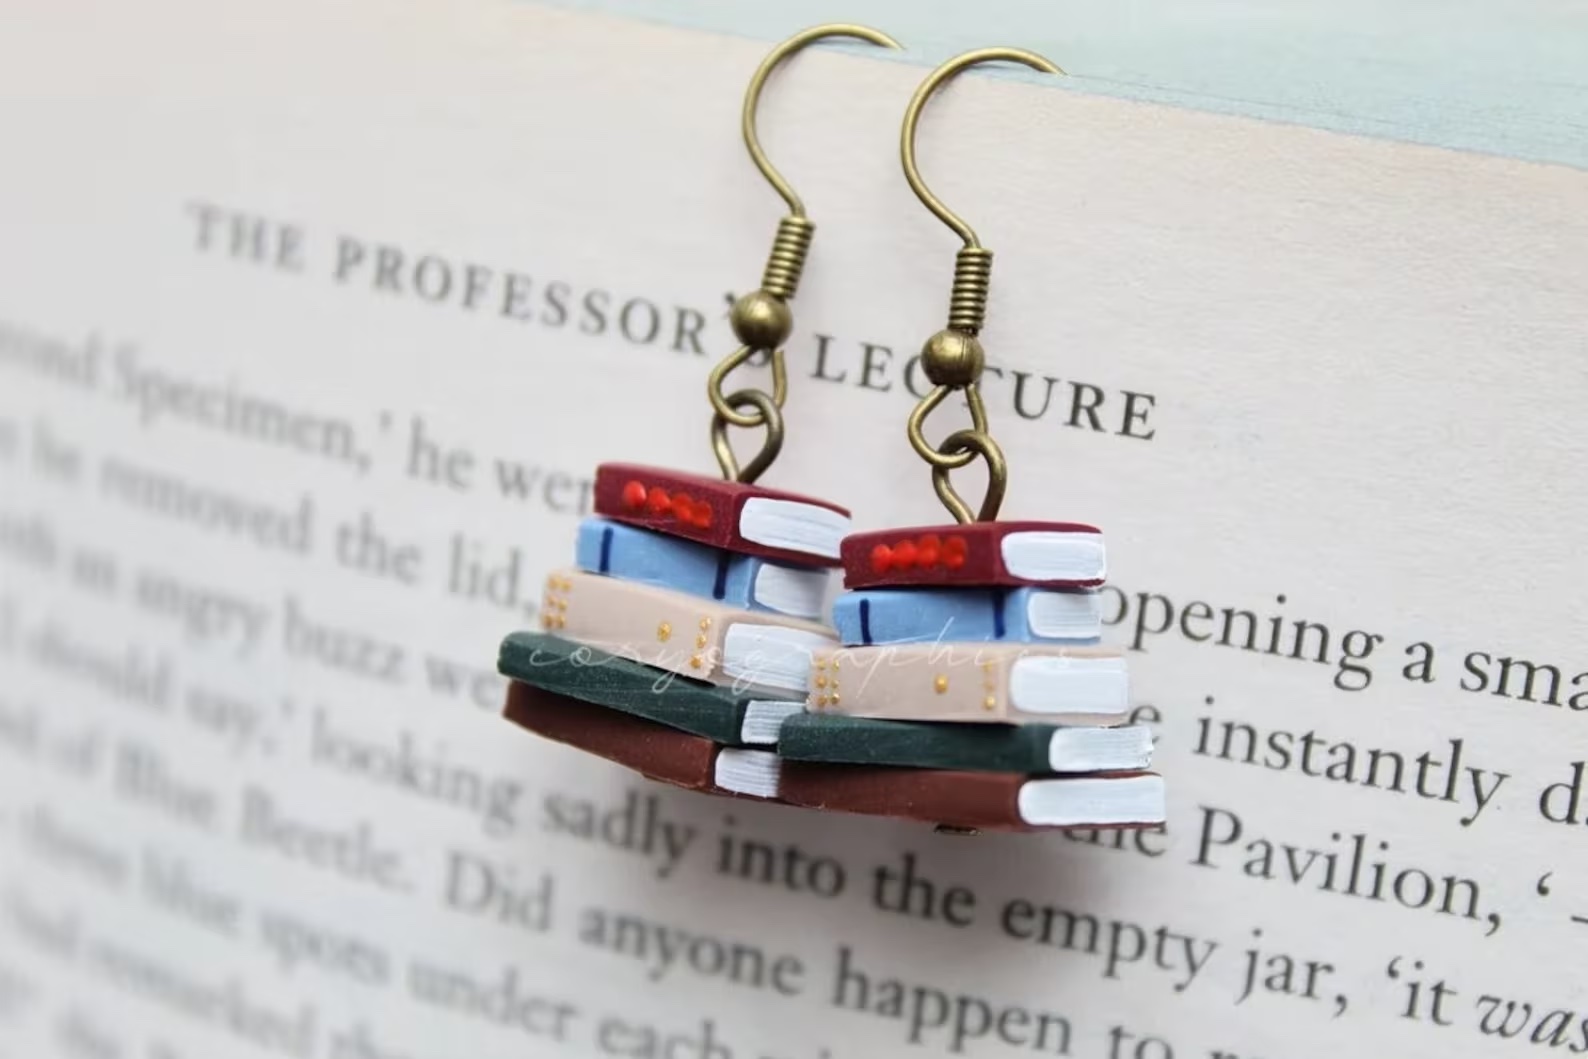 a photo of a pair of earrings. Each earring is a stack of books with spines in all different colors